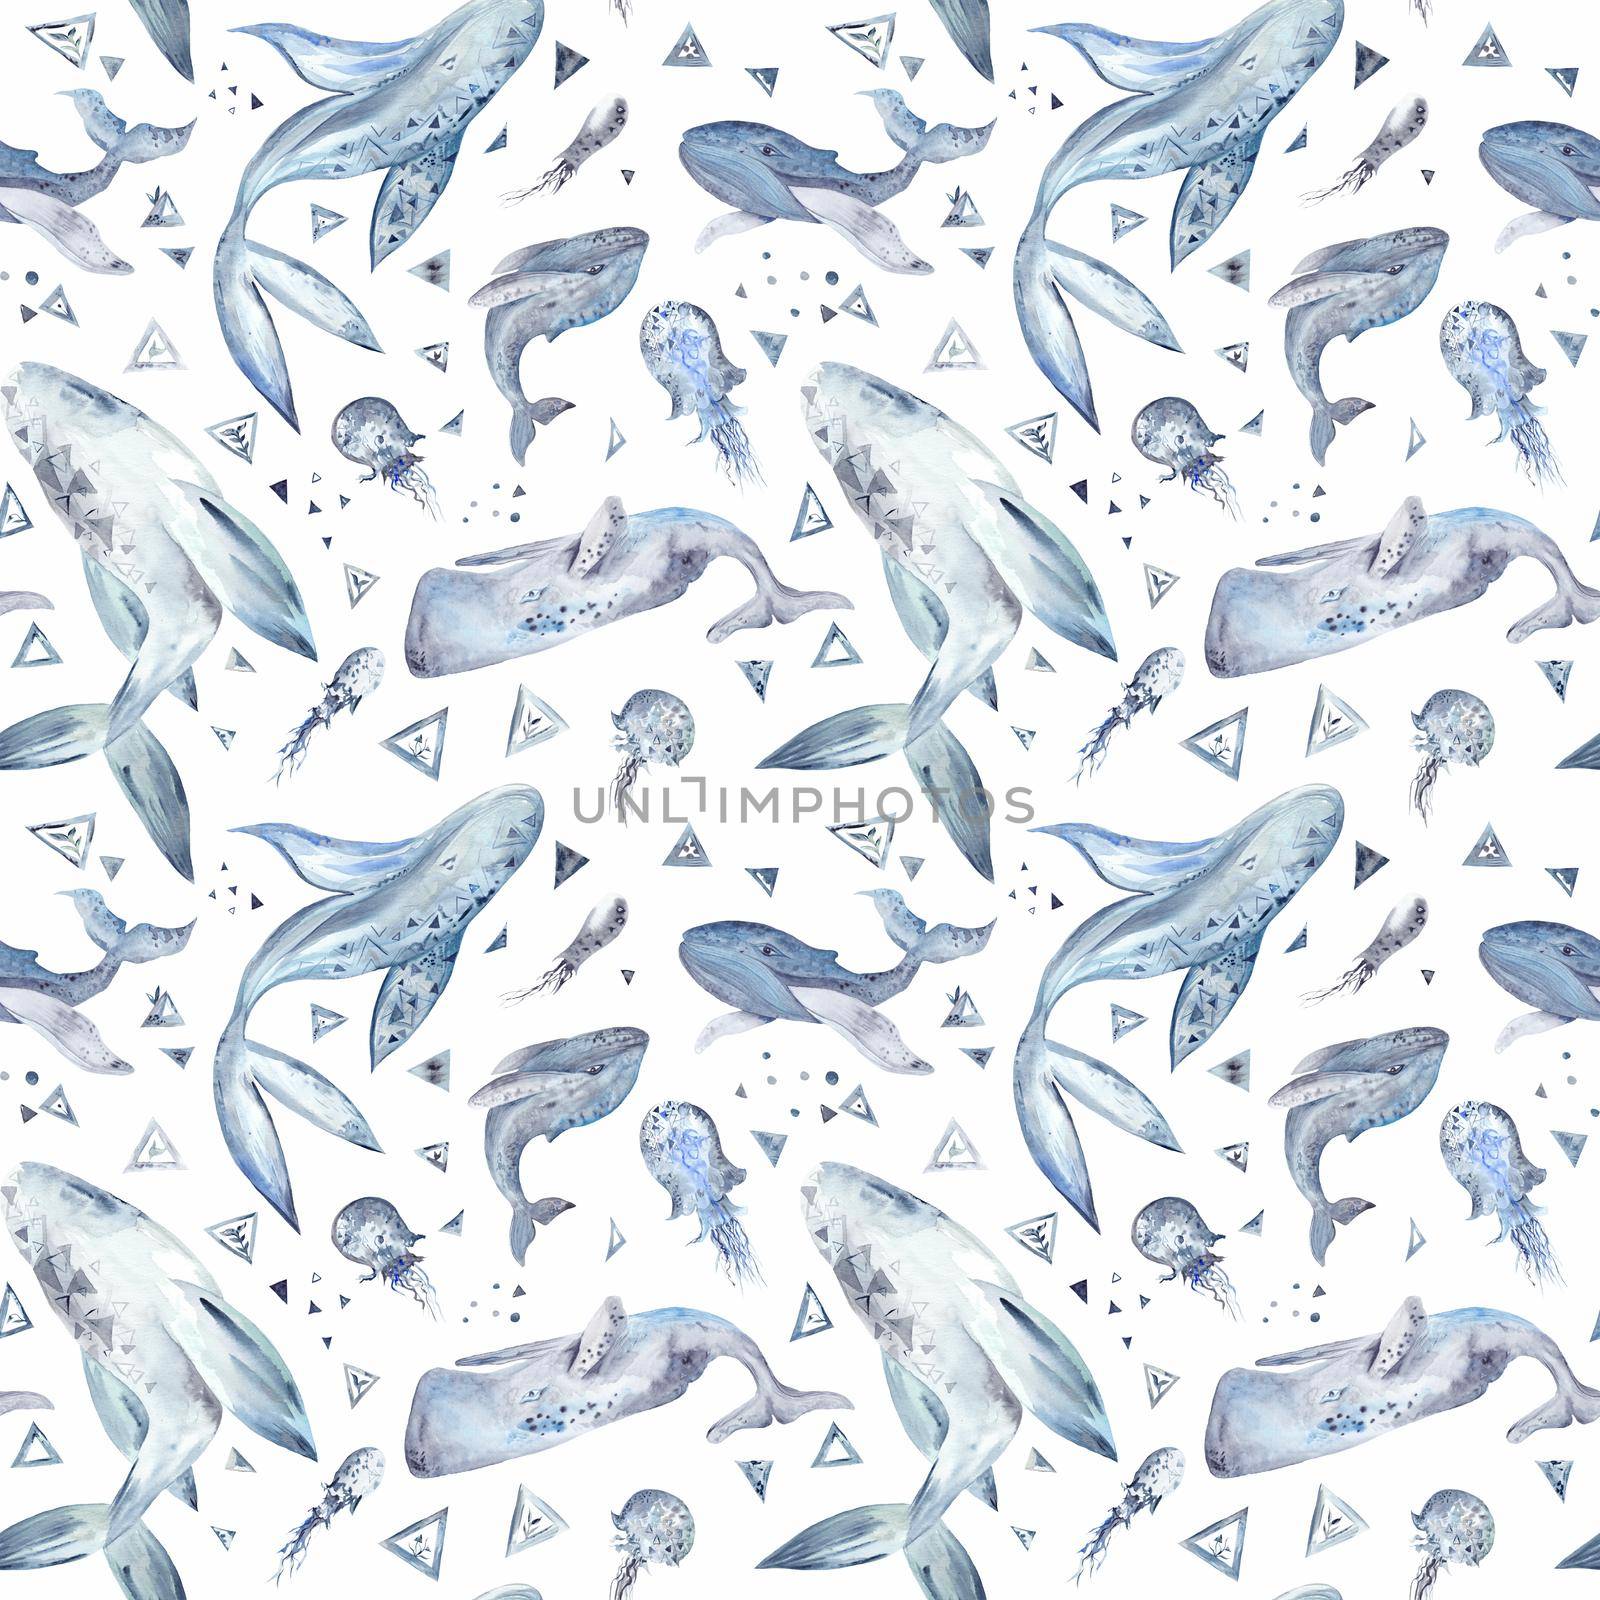 Space Whale Watercolor Pattern on white background by kisika